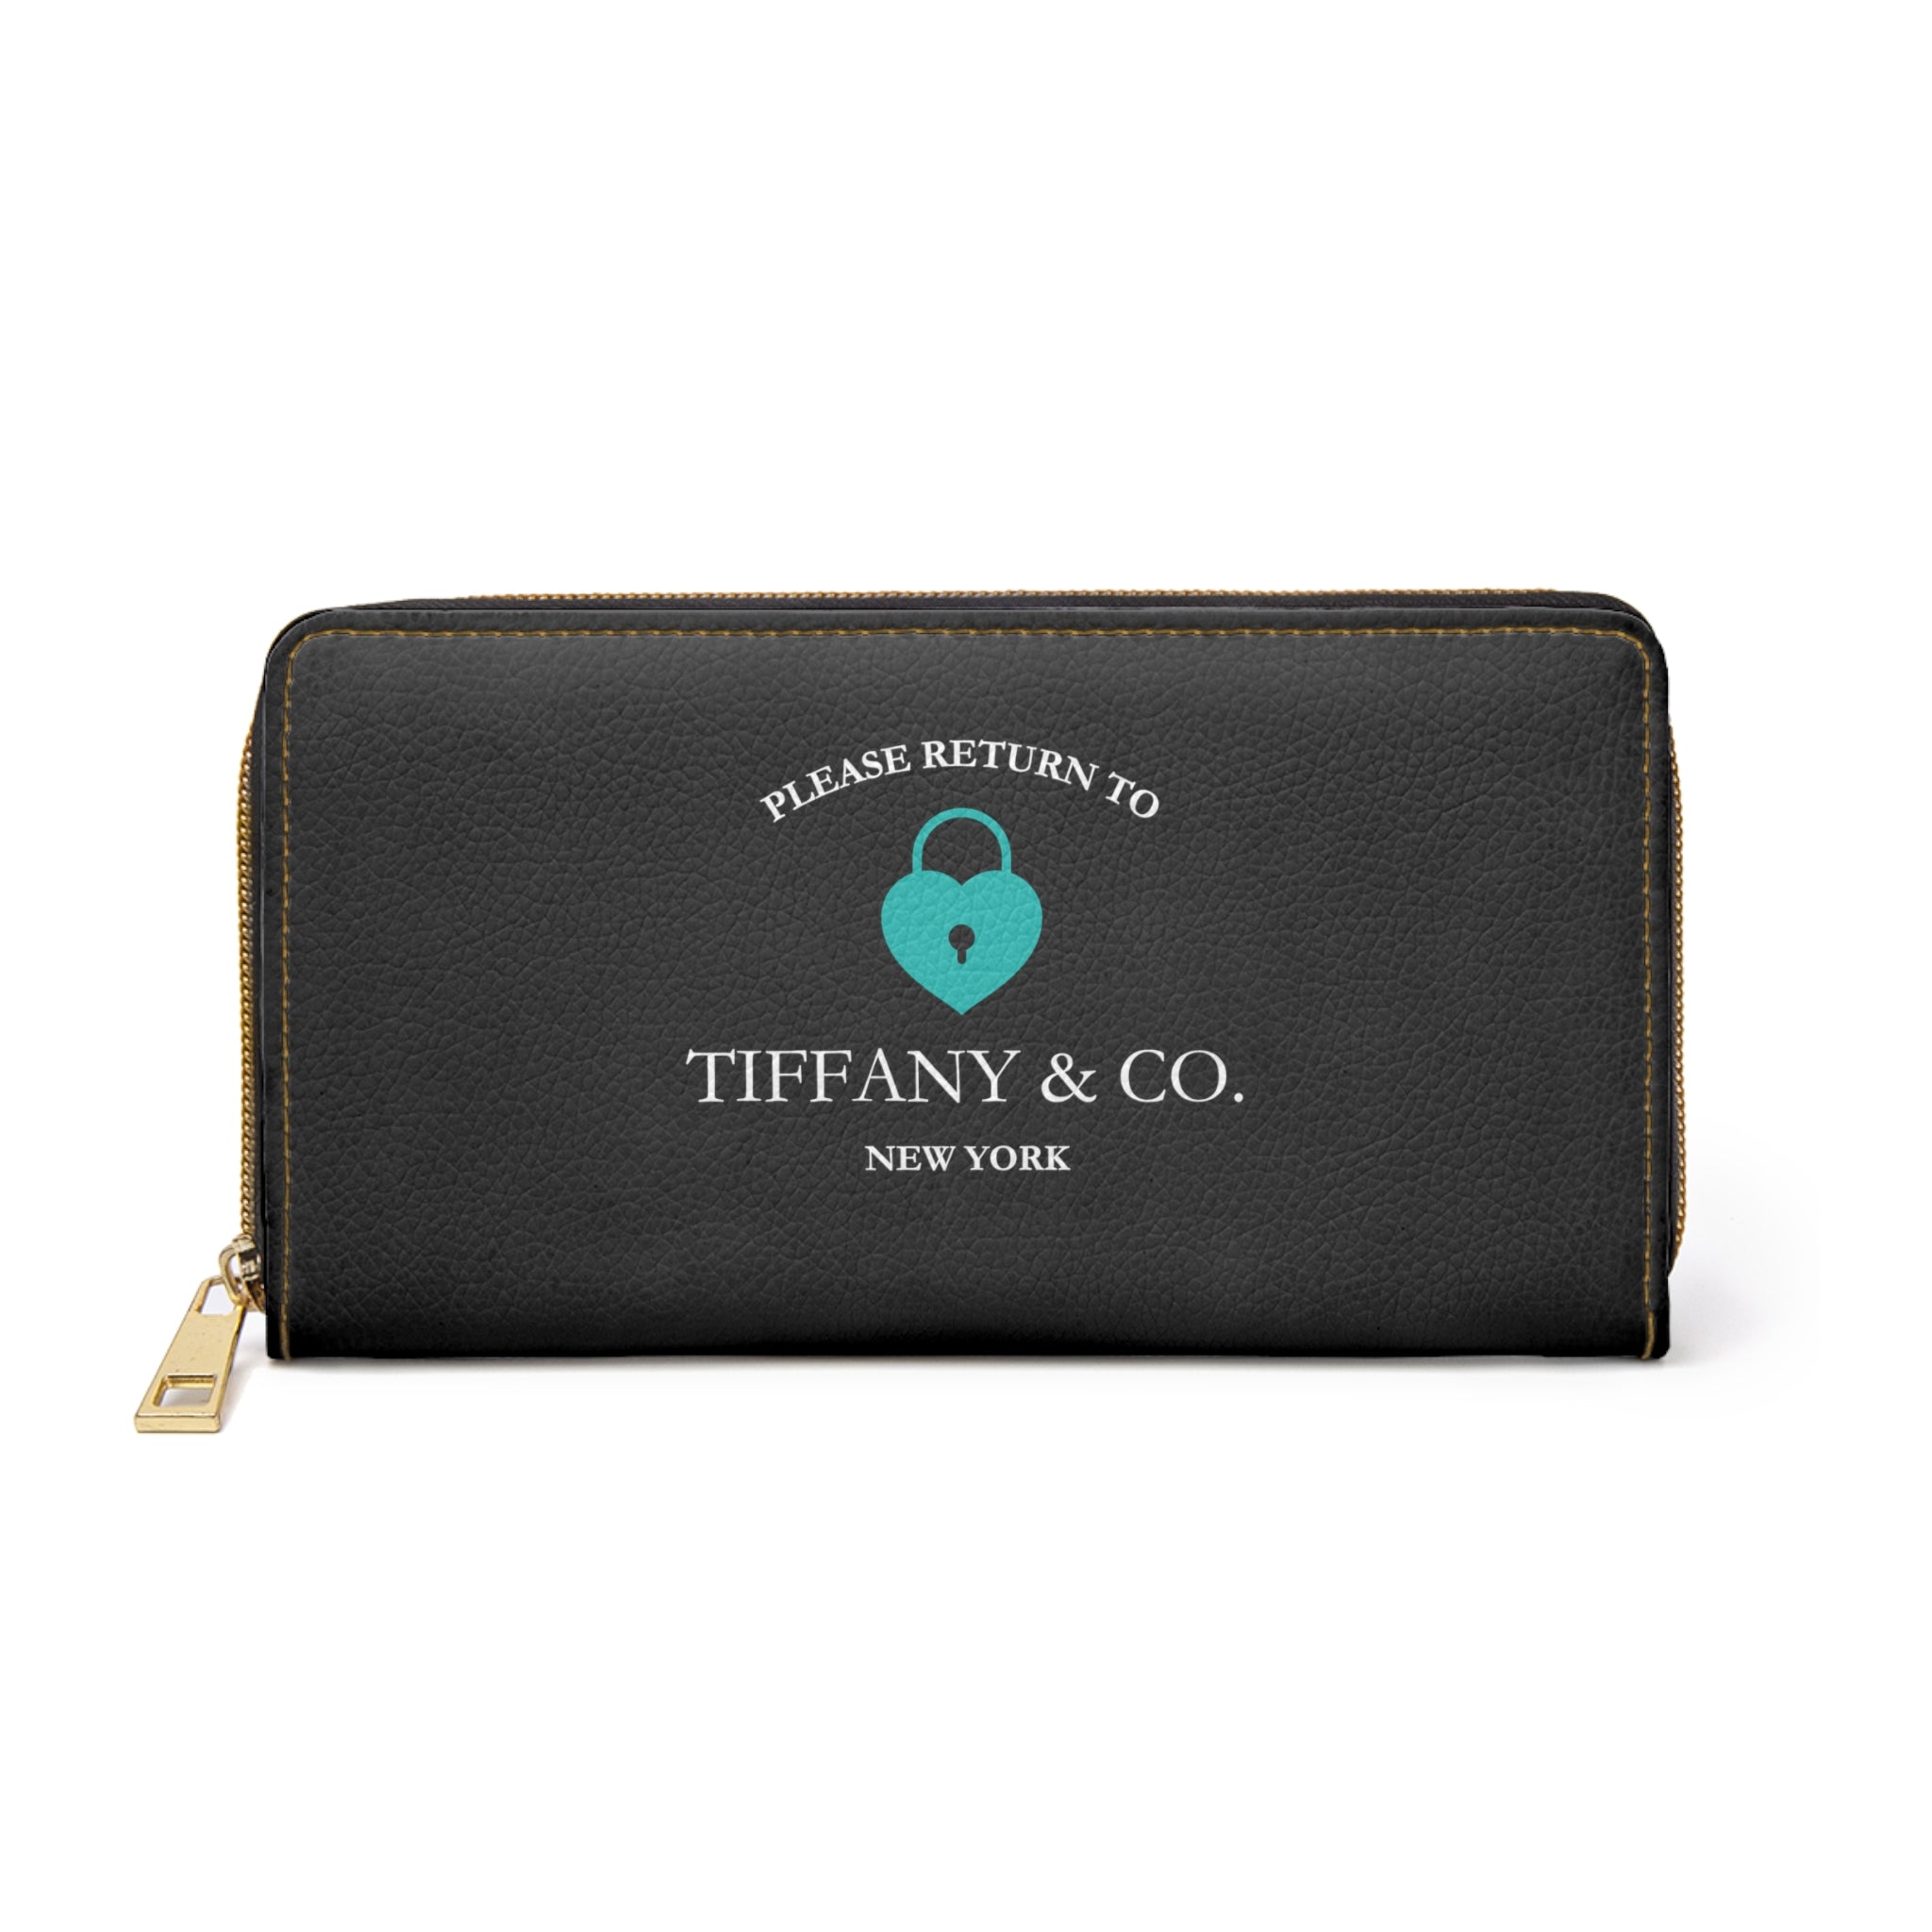 Tiffany and Co. (Lock) Designer inspired Ladies Wallet, Zipper Pouch, Coin Purse, Zippered Wallet, Cute Purse Accessories One-size-White The Middle Aged Groove